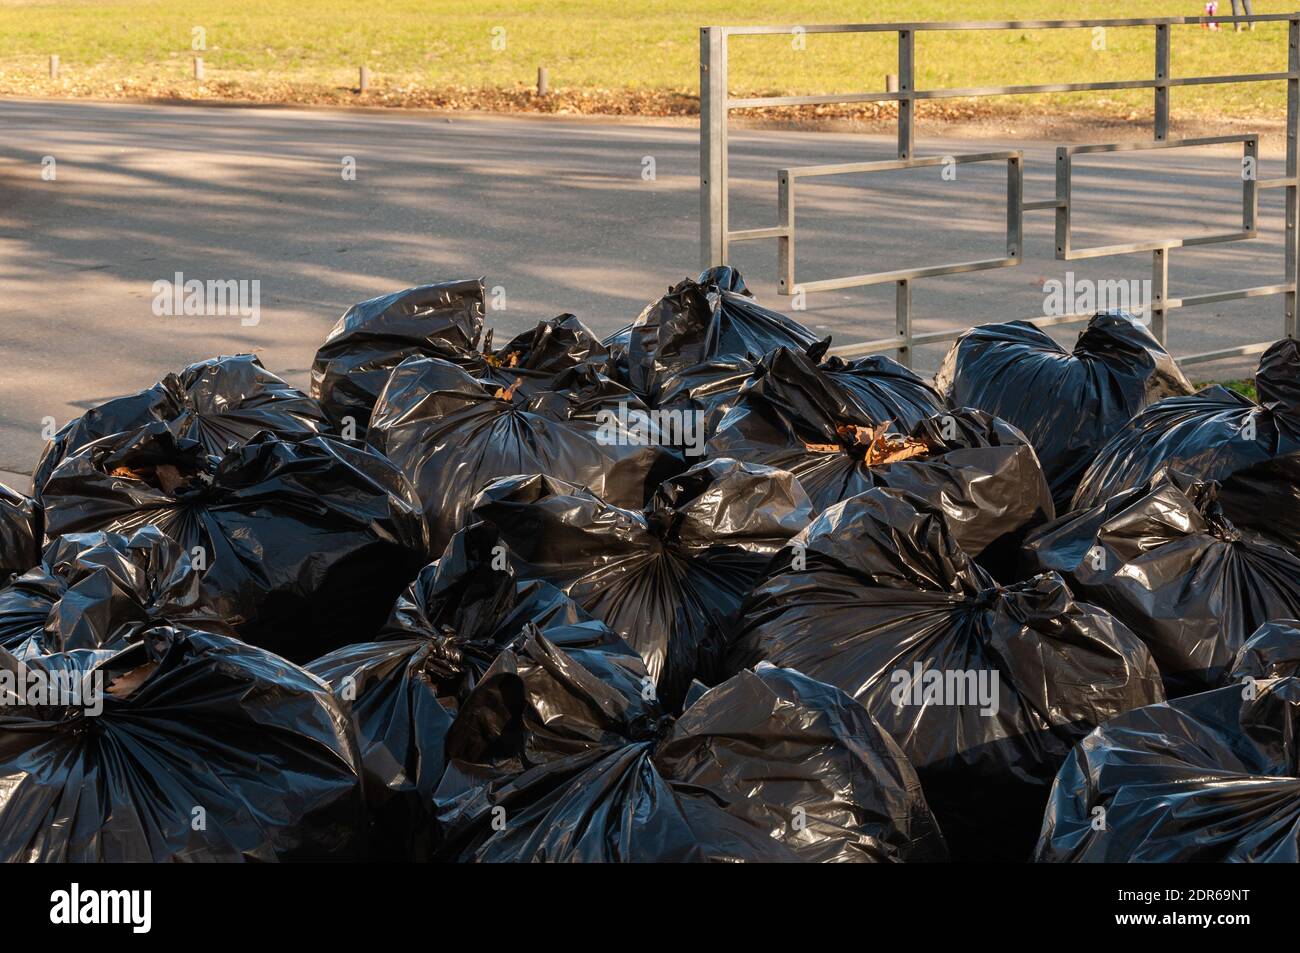 Black bags of garbage. Autumn cleaning. Leaves in the bags. Stock Photo